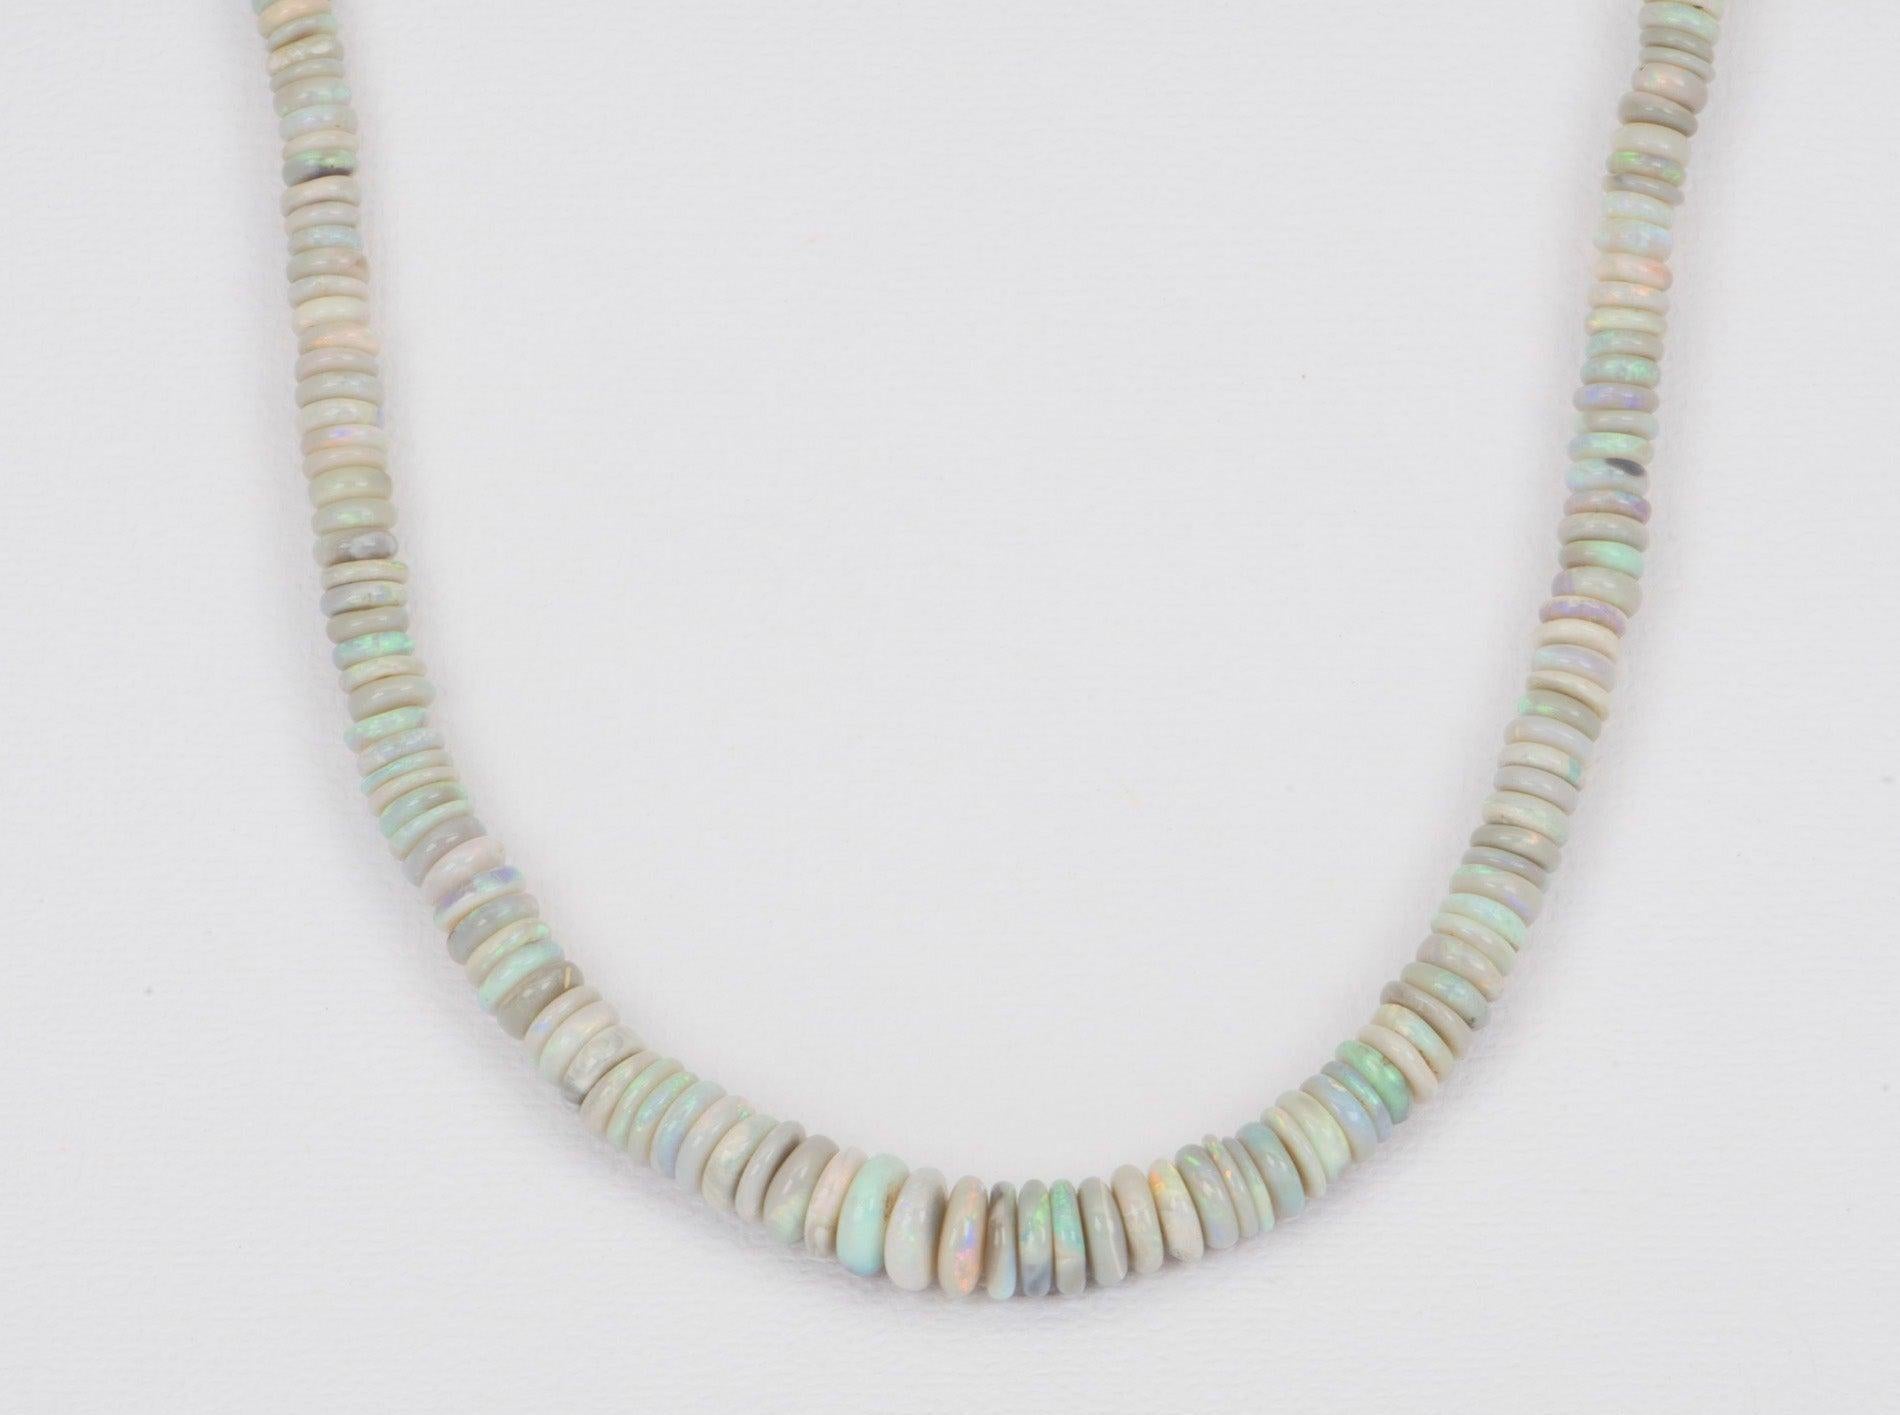 ♥ Solid Australian black Opal Heishi bead necklace with a 14k yellow gold push gate oval clasp
♥ The necklace measures 17